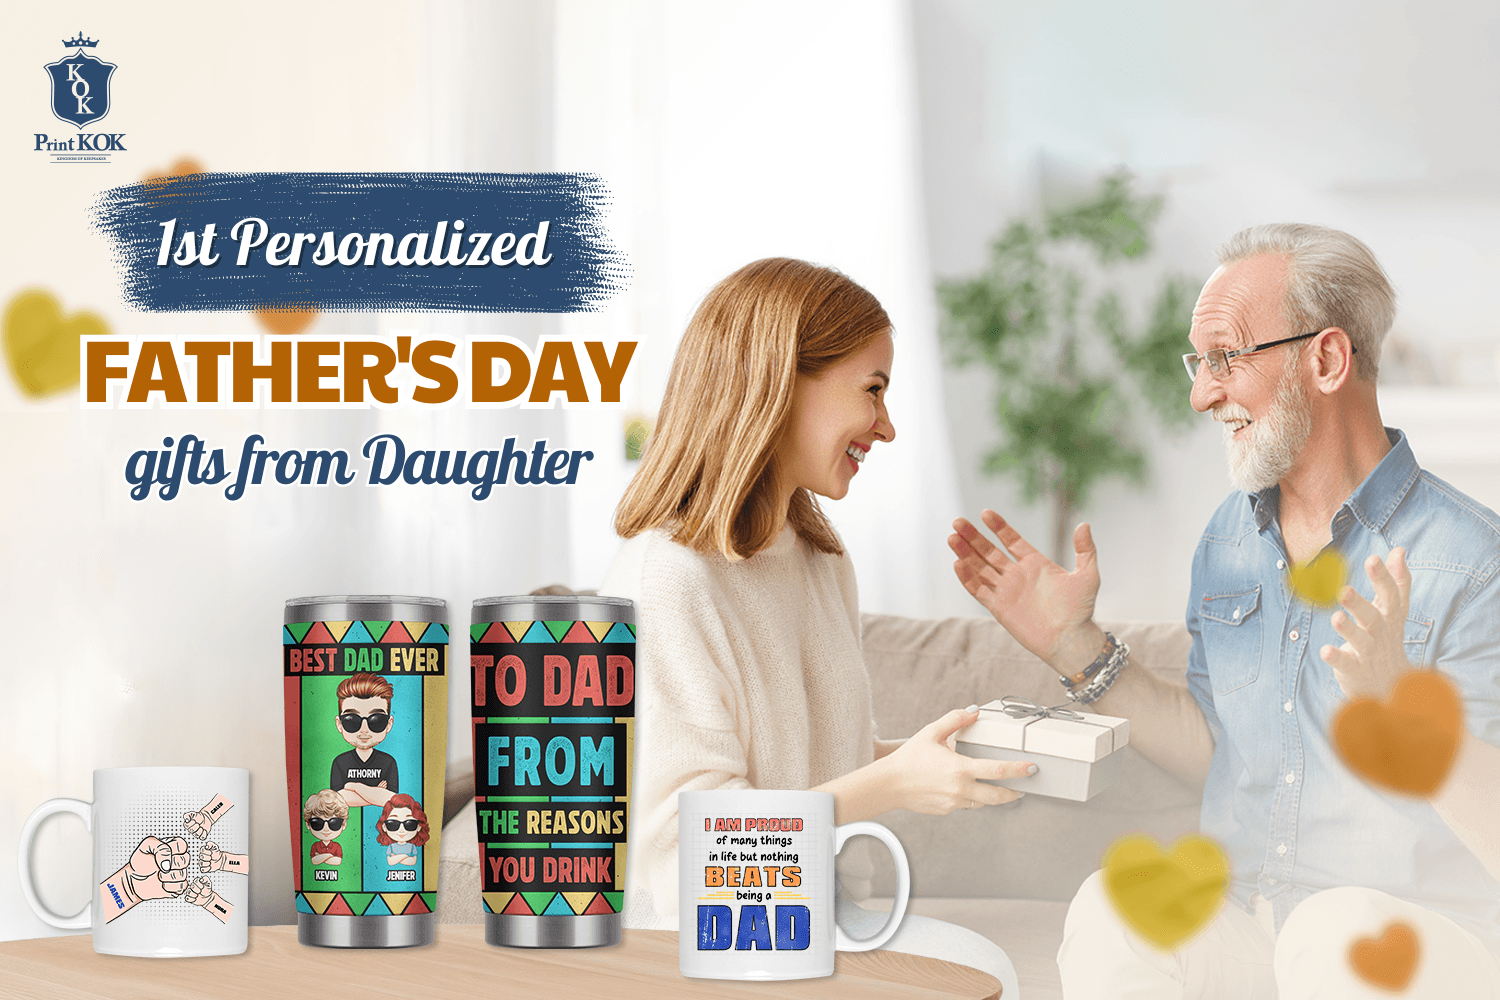 Father and daughter celebrating with personalized Father's Day gifts.